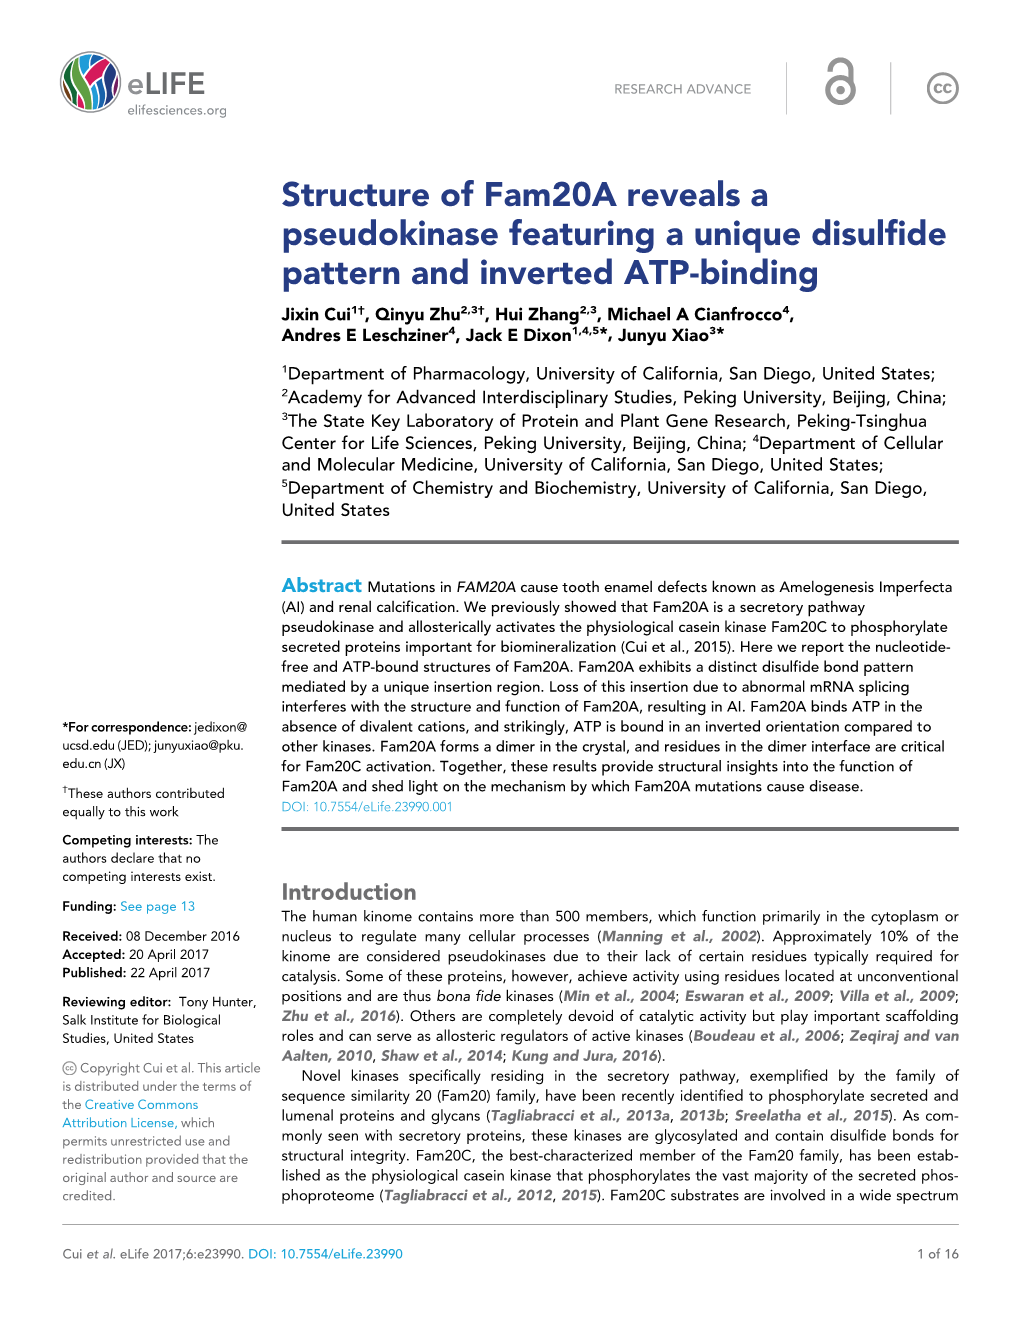 Structure of Fam20a Reveals a Pseudokinase Featuring A